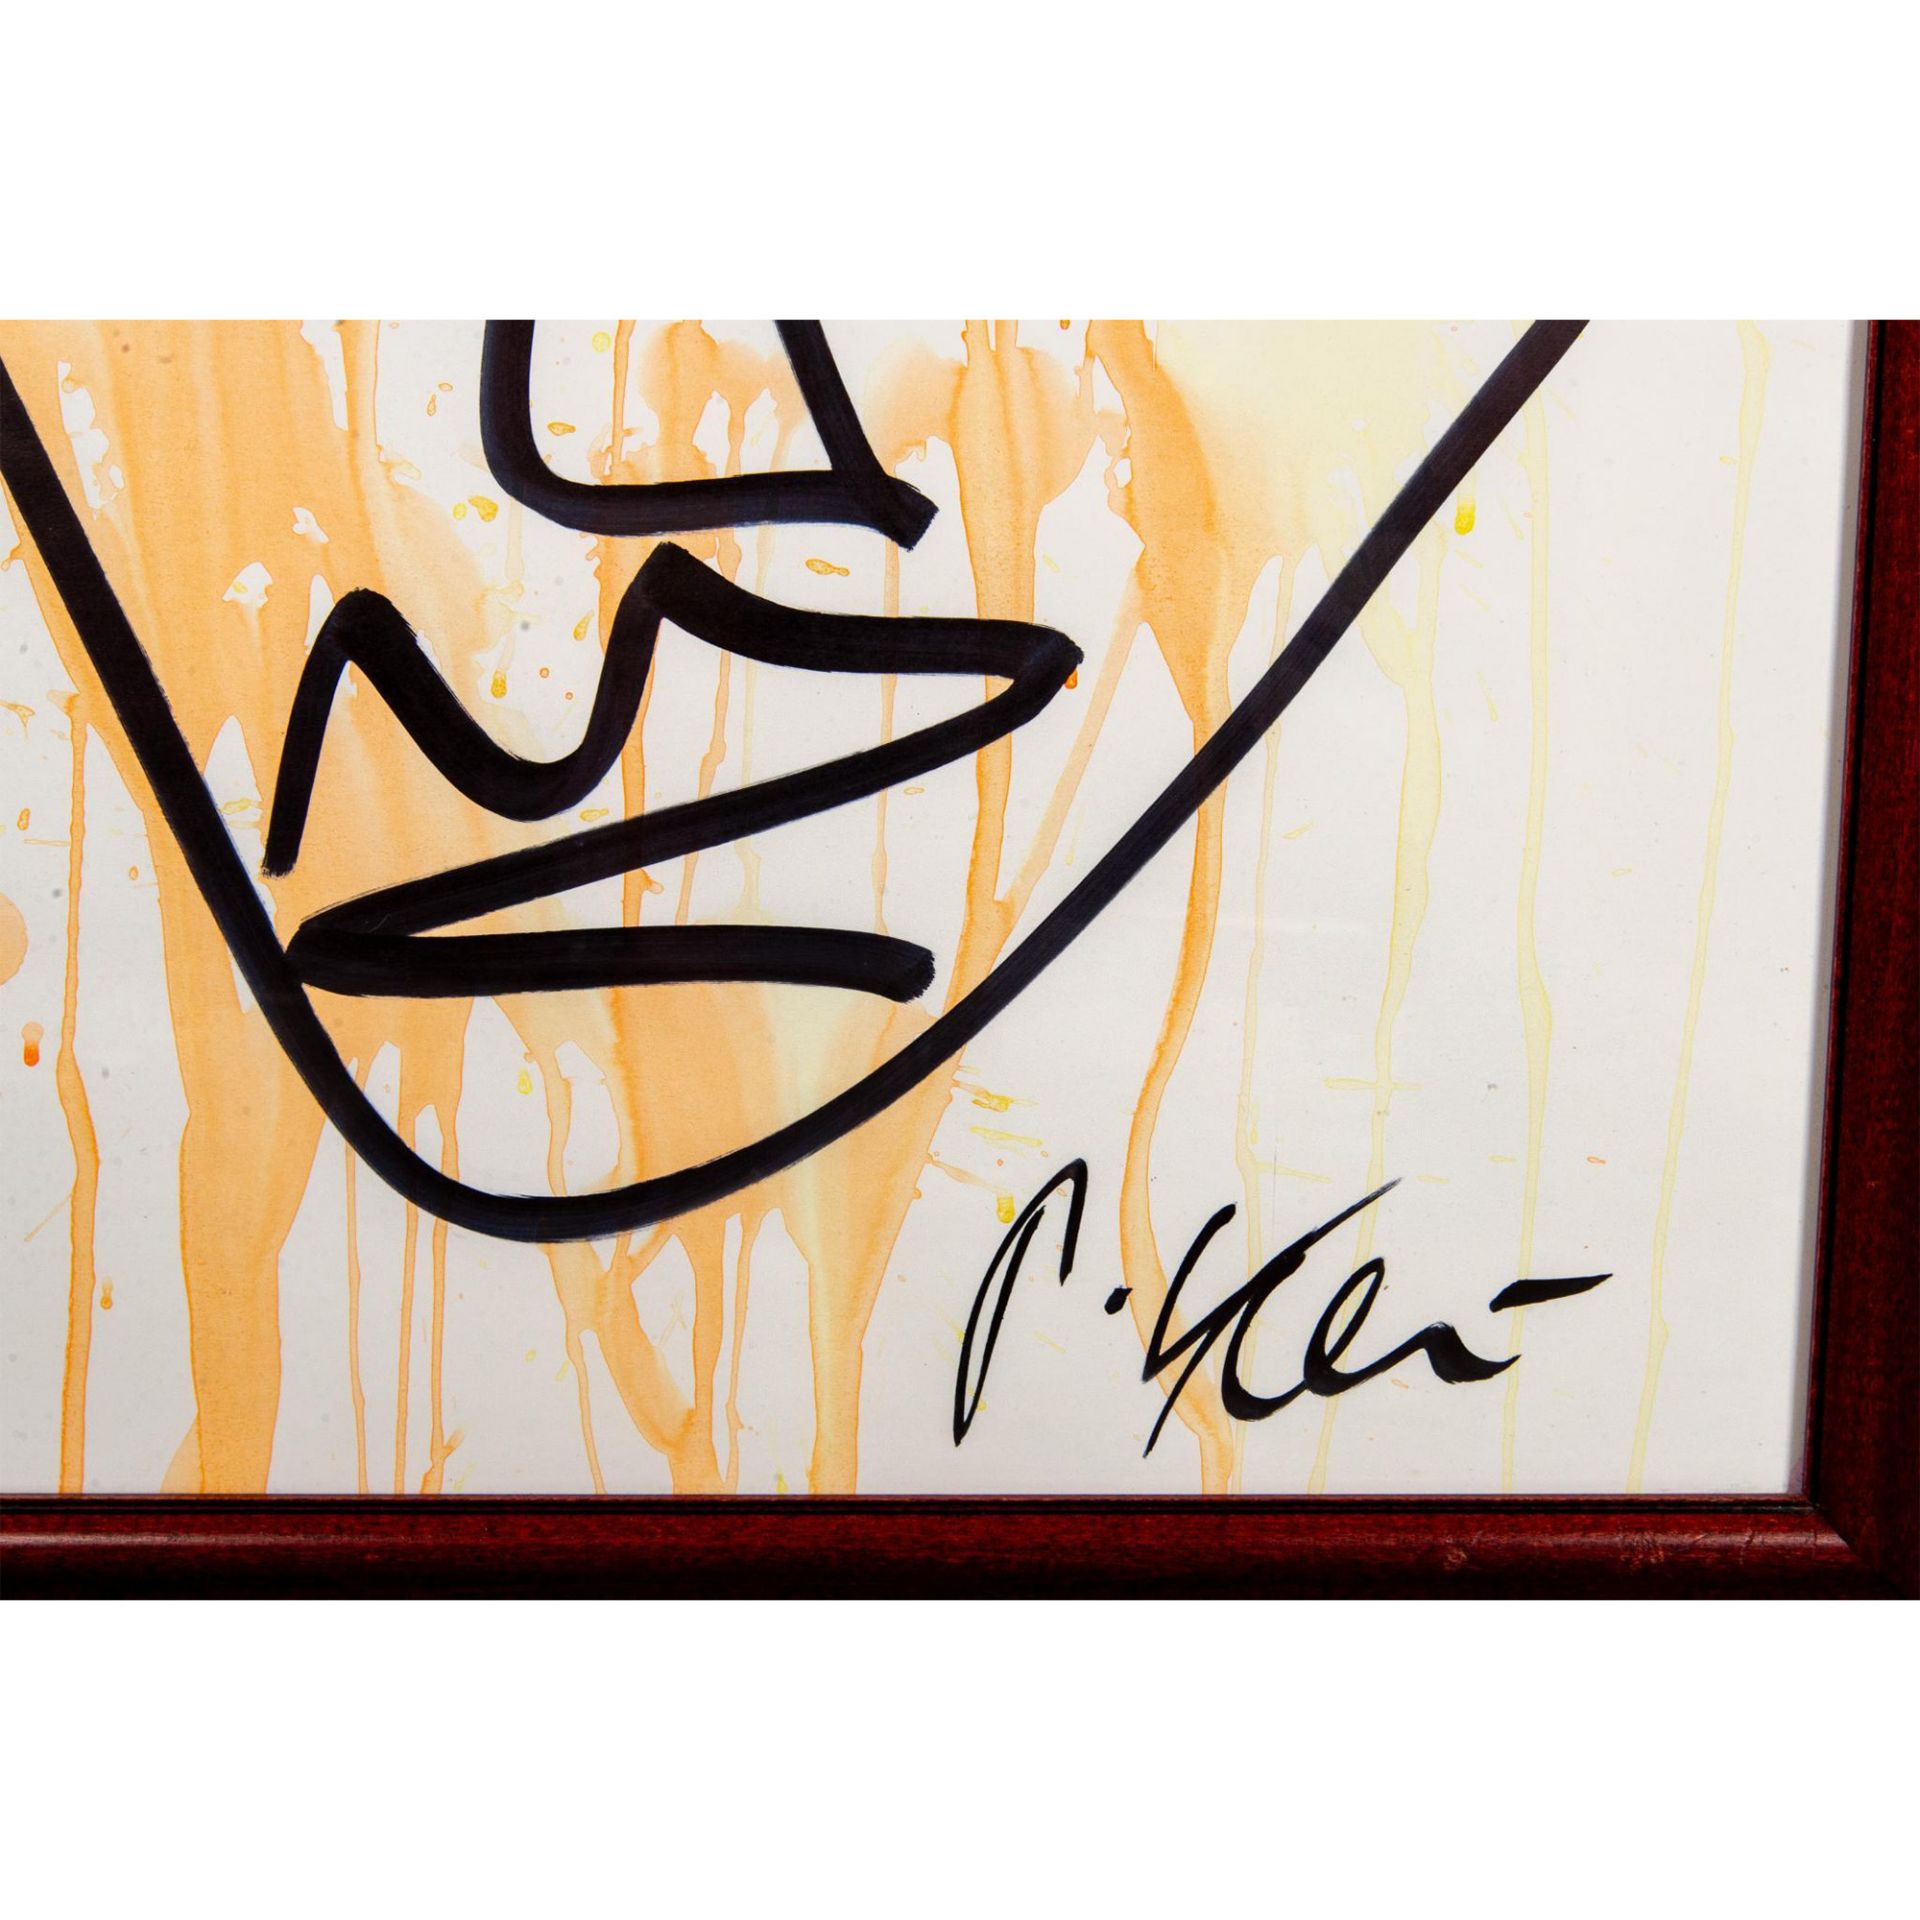 Peter Keil, Original Painting on White Board, Signed - Image 3 of 4